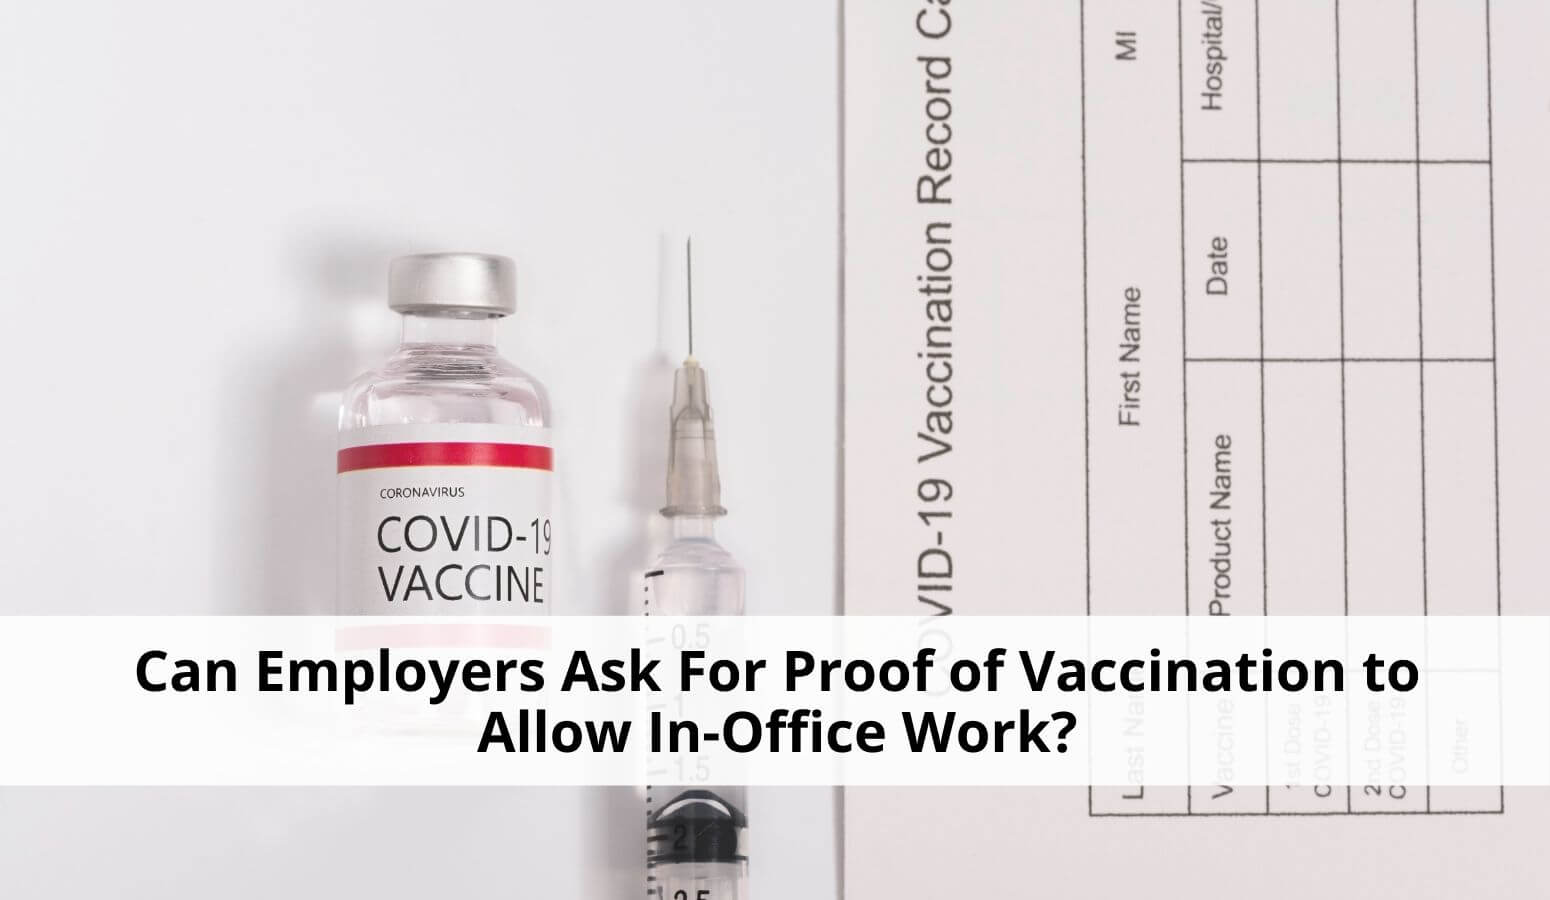 Featured image for “Proof of Vaccination for In-Office Work”